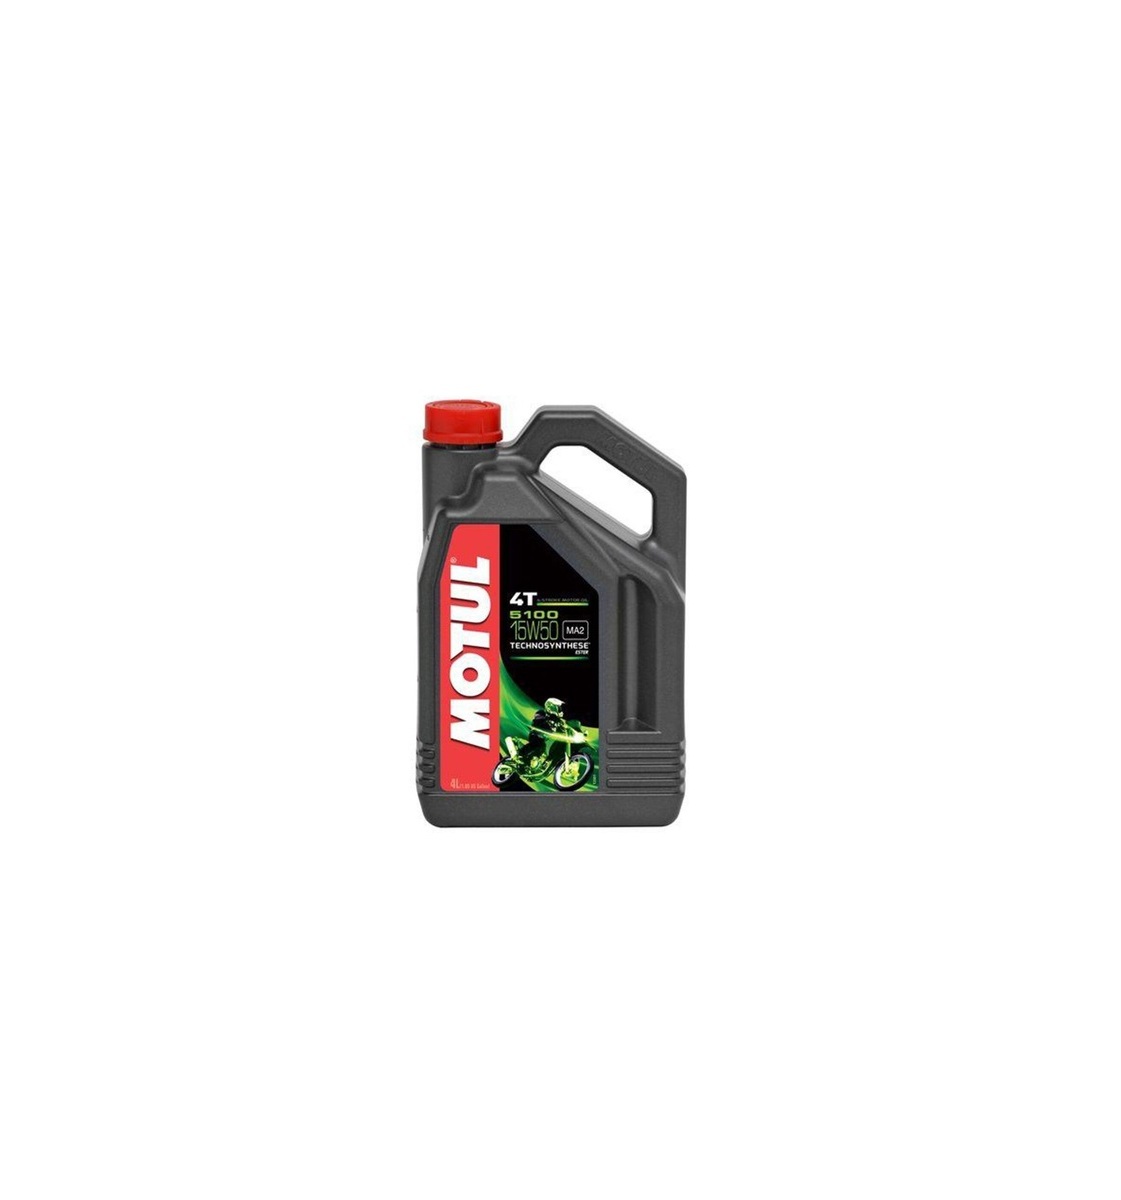 <span style="font-weight: bold;">Масло моторное MOTUL 5100 15W-50 4Т, 4 л.</span>